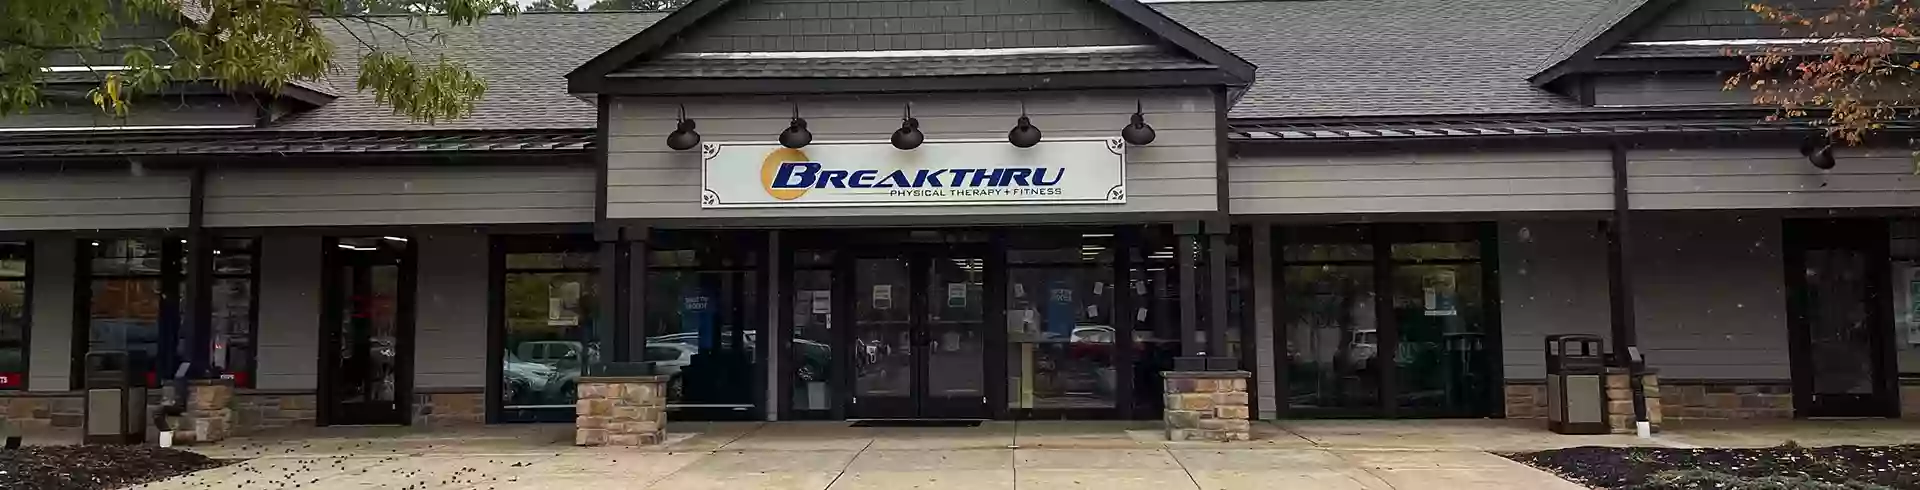 Breakthru Physical Therapy & Fitness - Medford